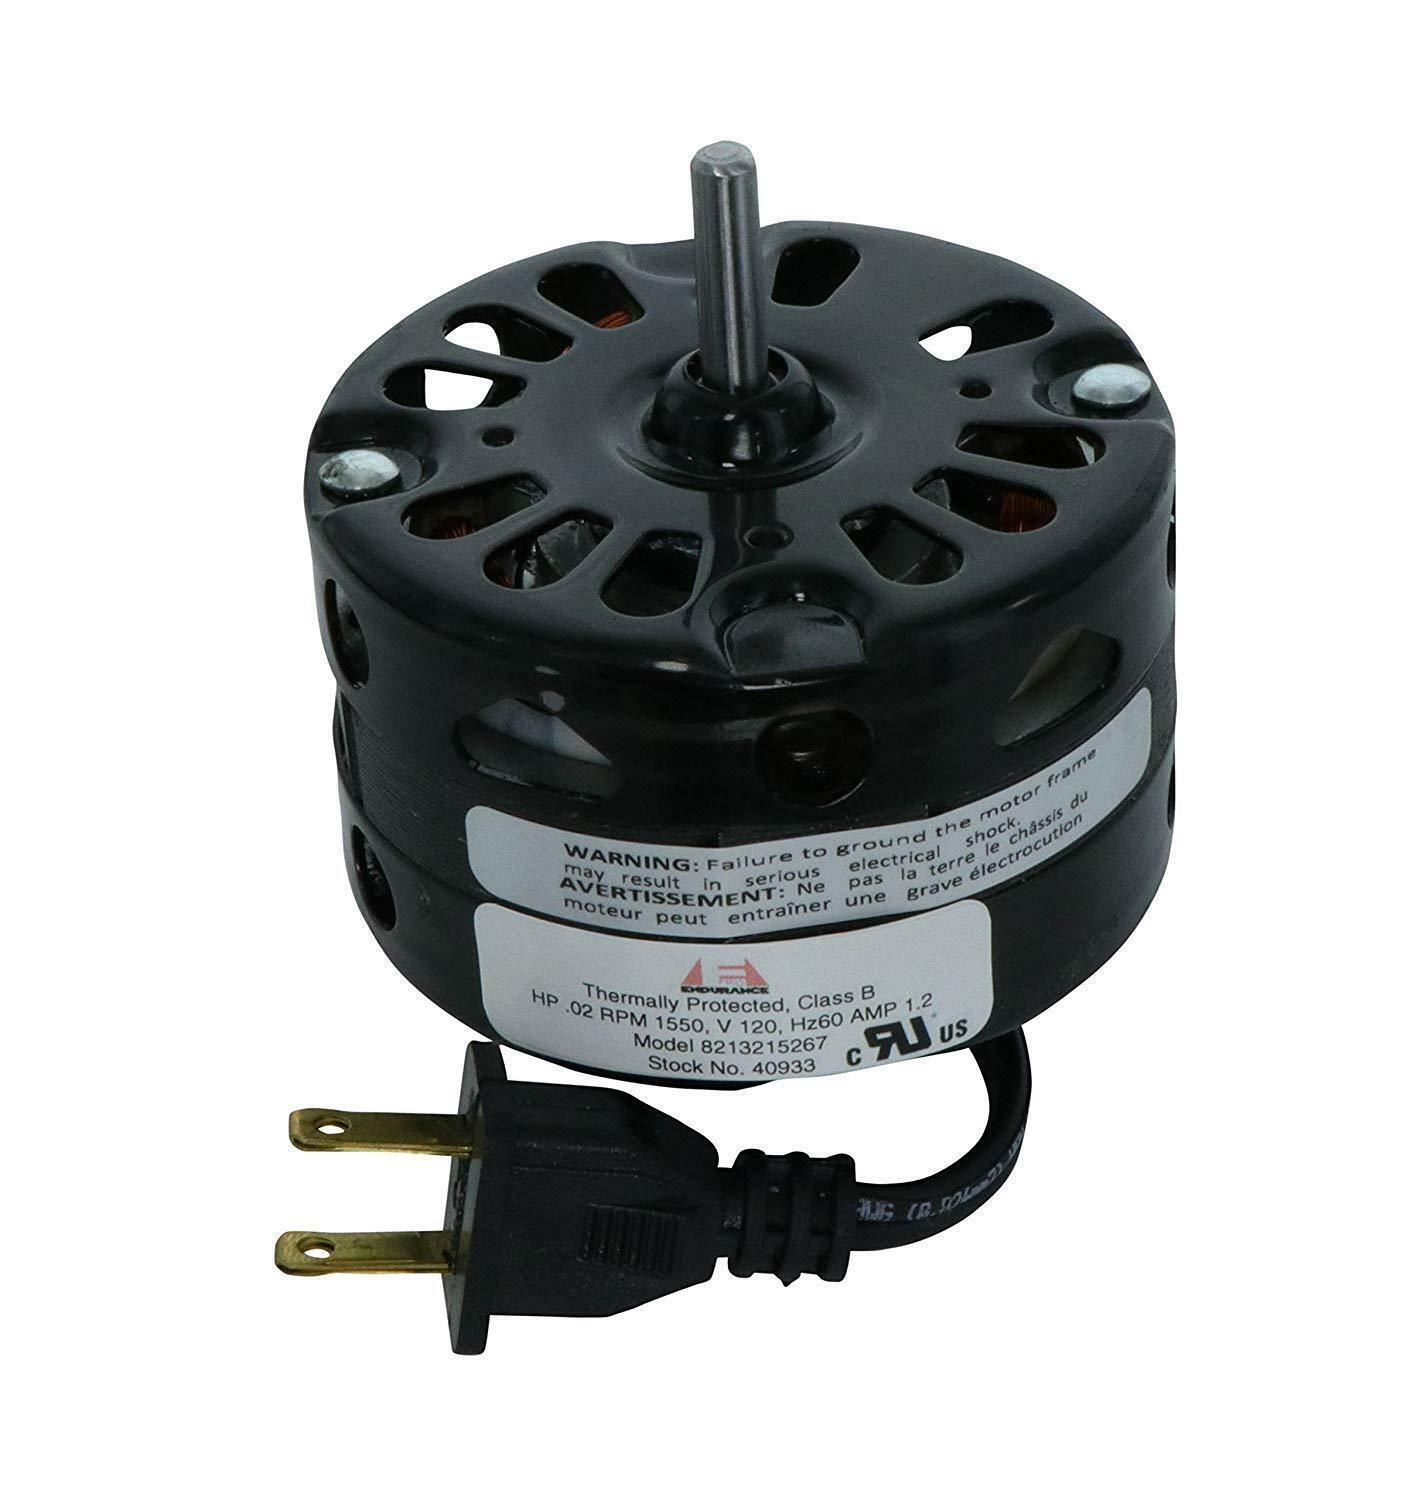 33 Ventilation Fan Motor 120v For Bathroom Kitchen Exhaust intended for dimensions 1424 X 1500